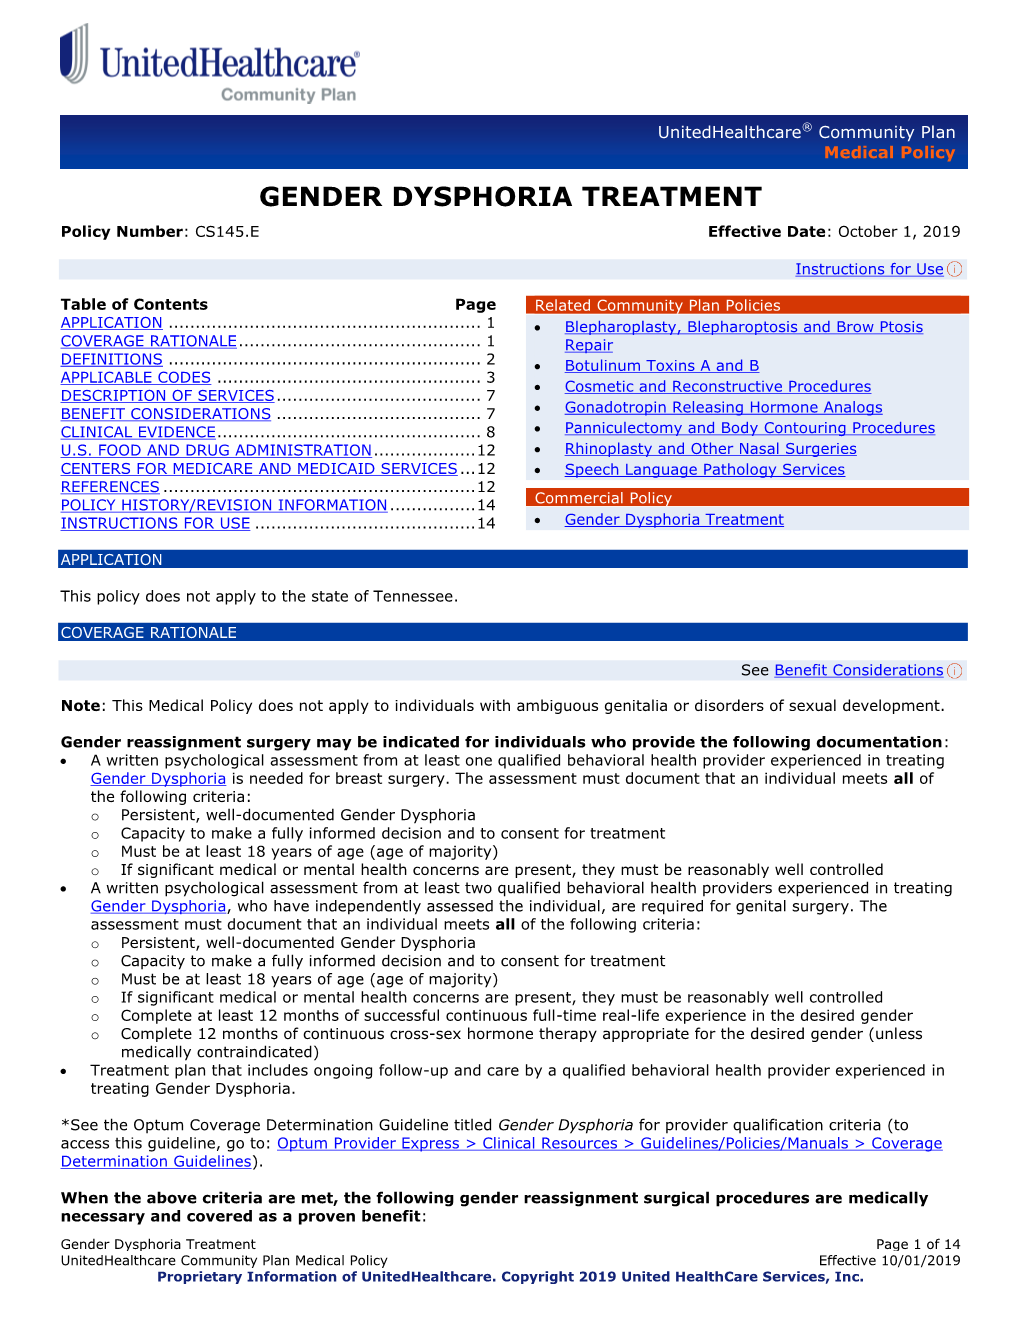 GENDER DYSPHORIA TREATMENT Policy Number: CS145.E Effective Date: October 1, 2019